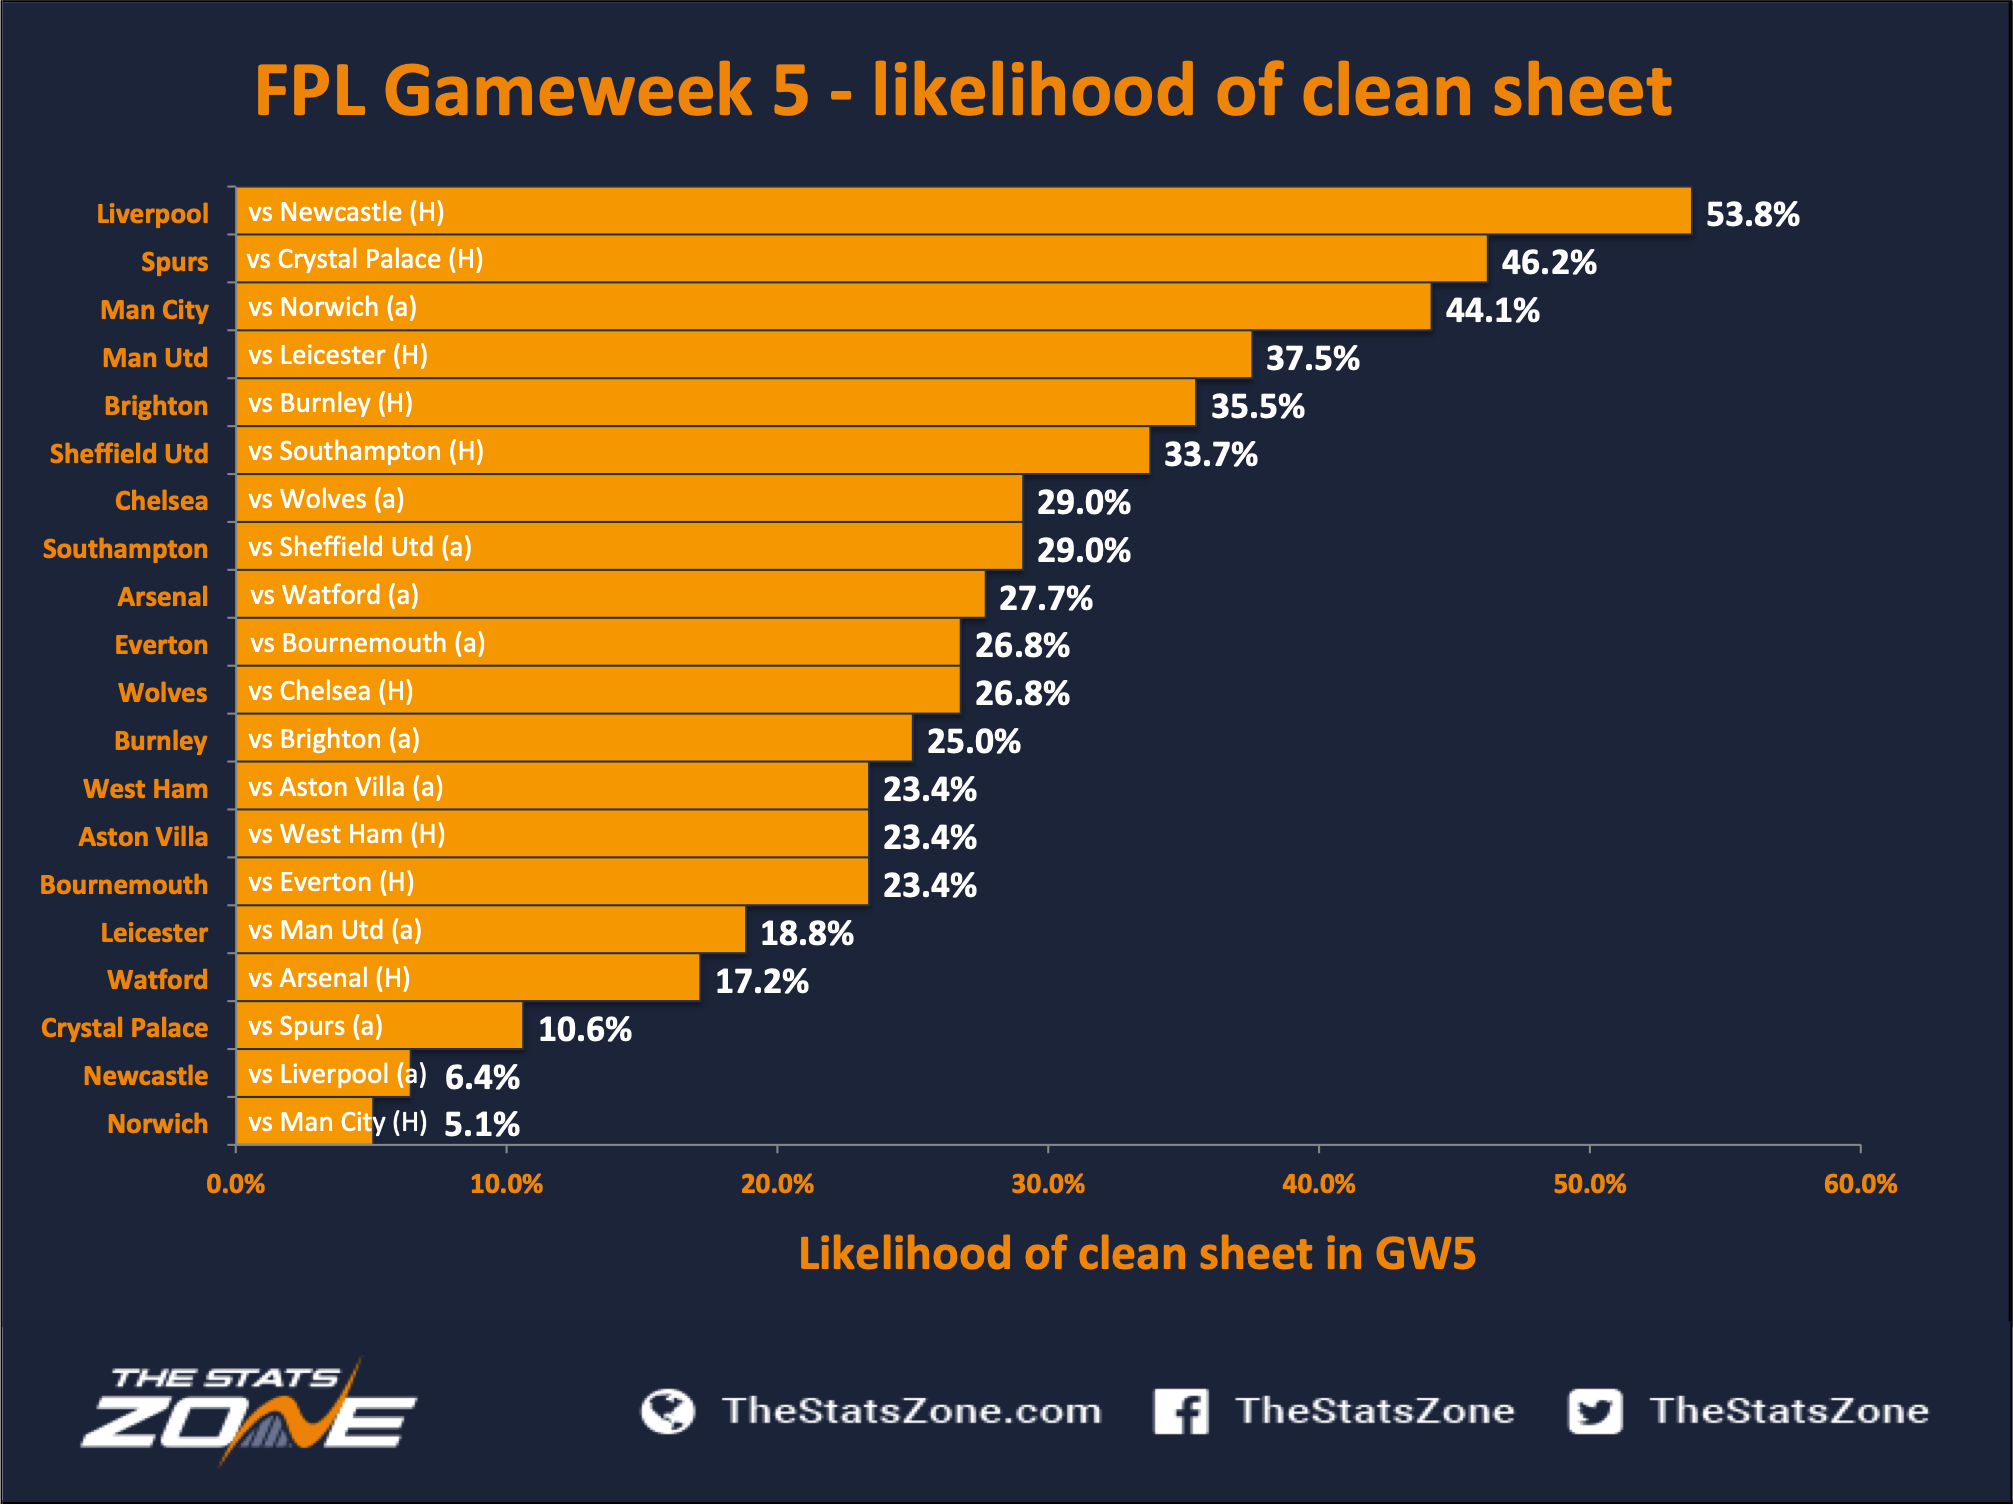 FPL Gameweek 5 – clean sheet predictions - The Stats Zone